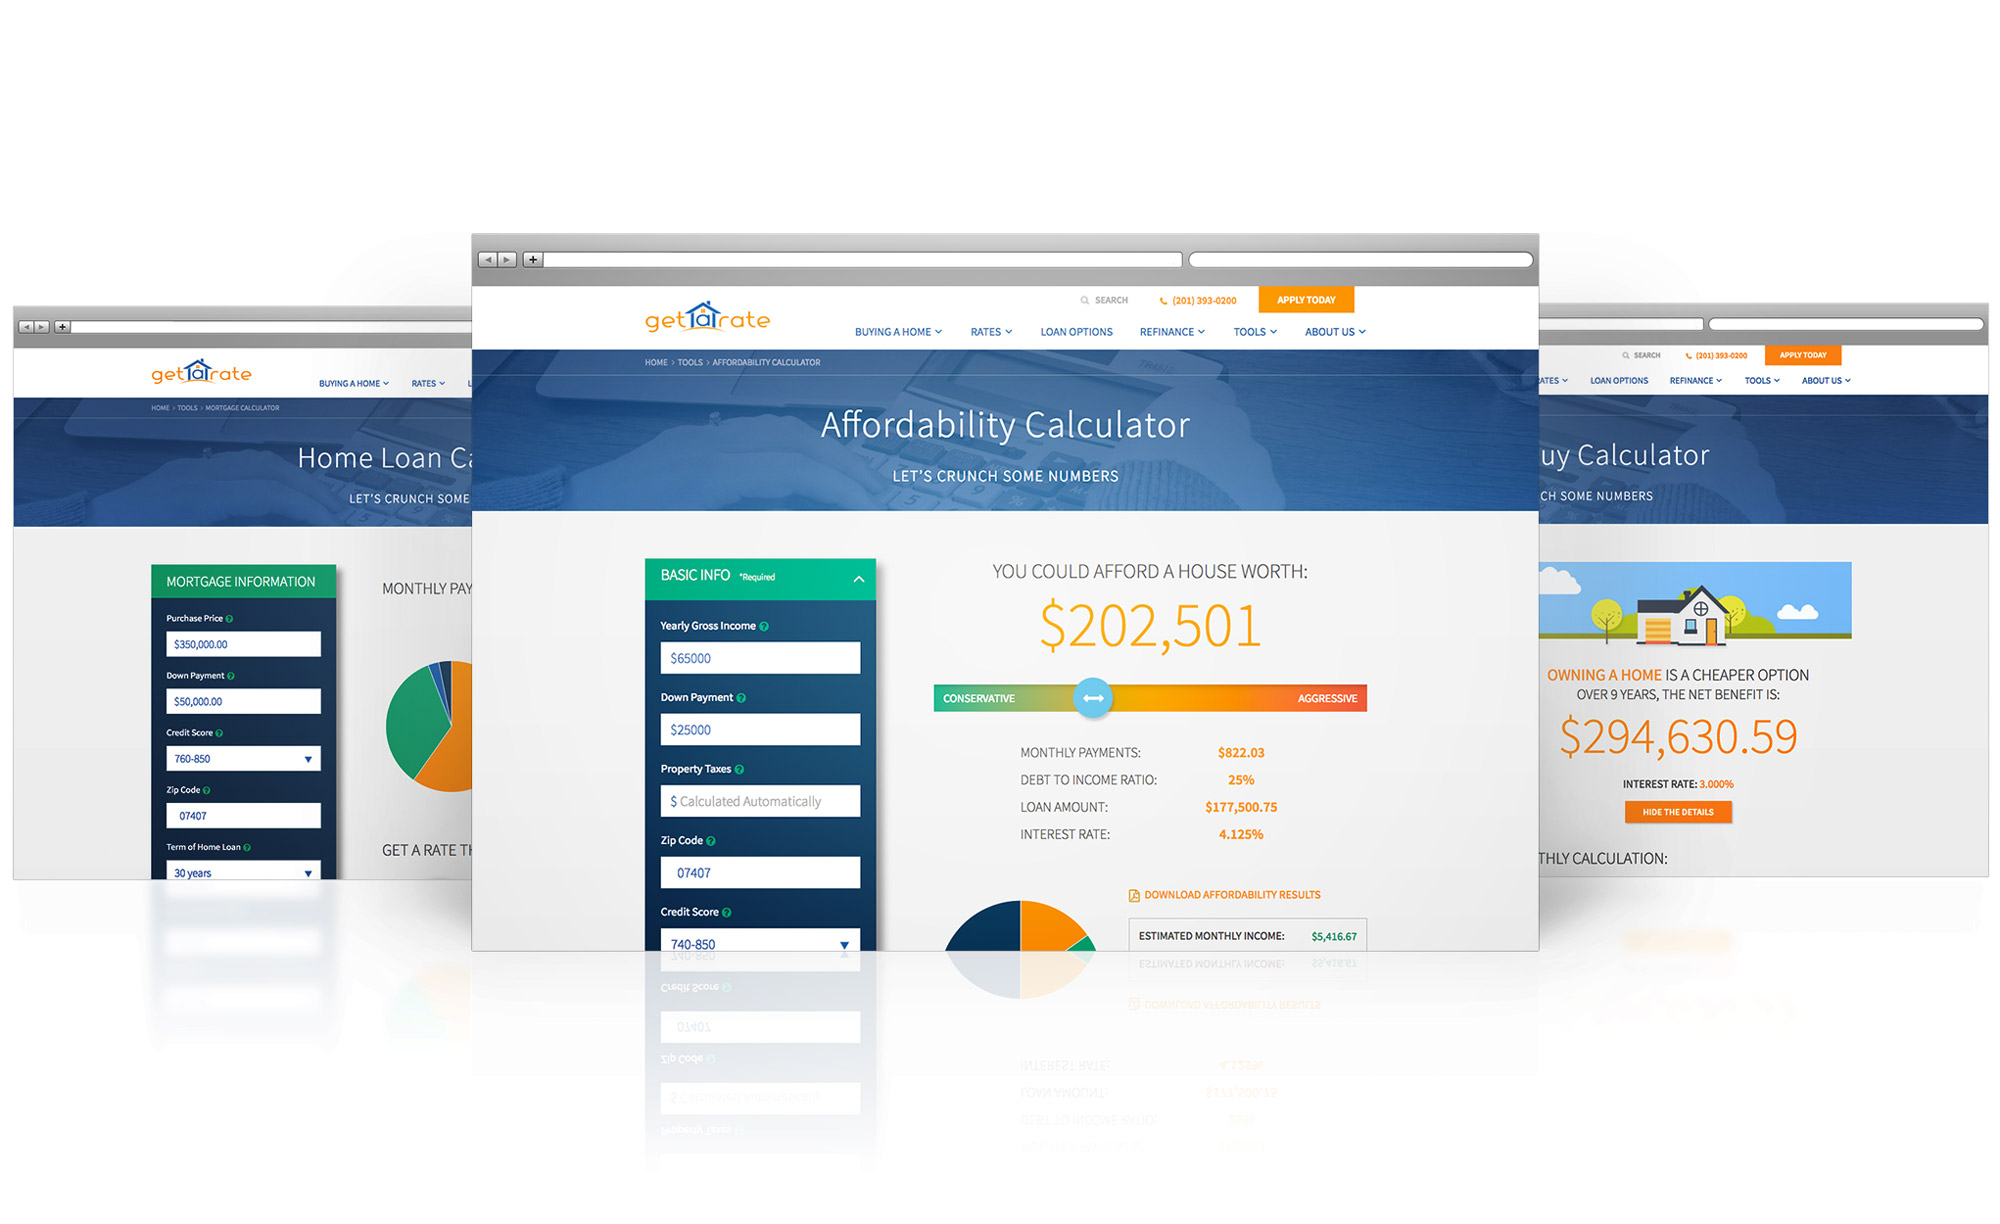 Get A Rate image: Affordability Calculator